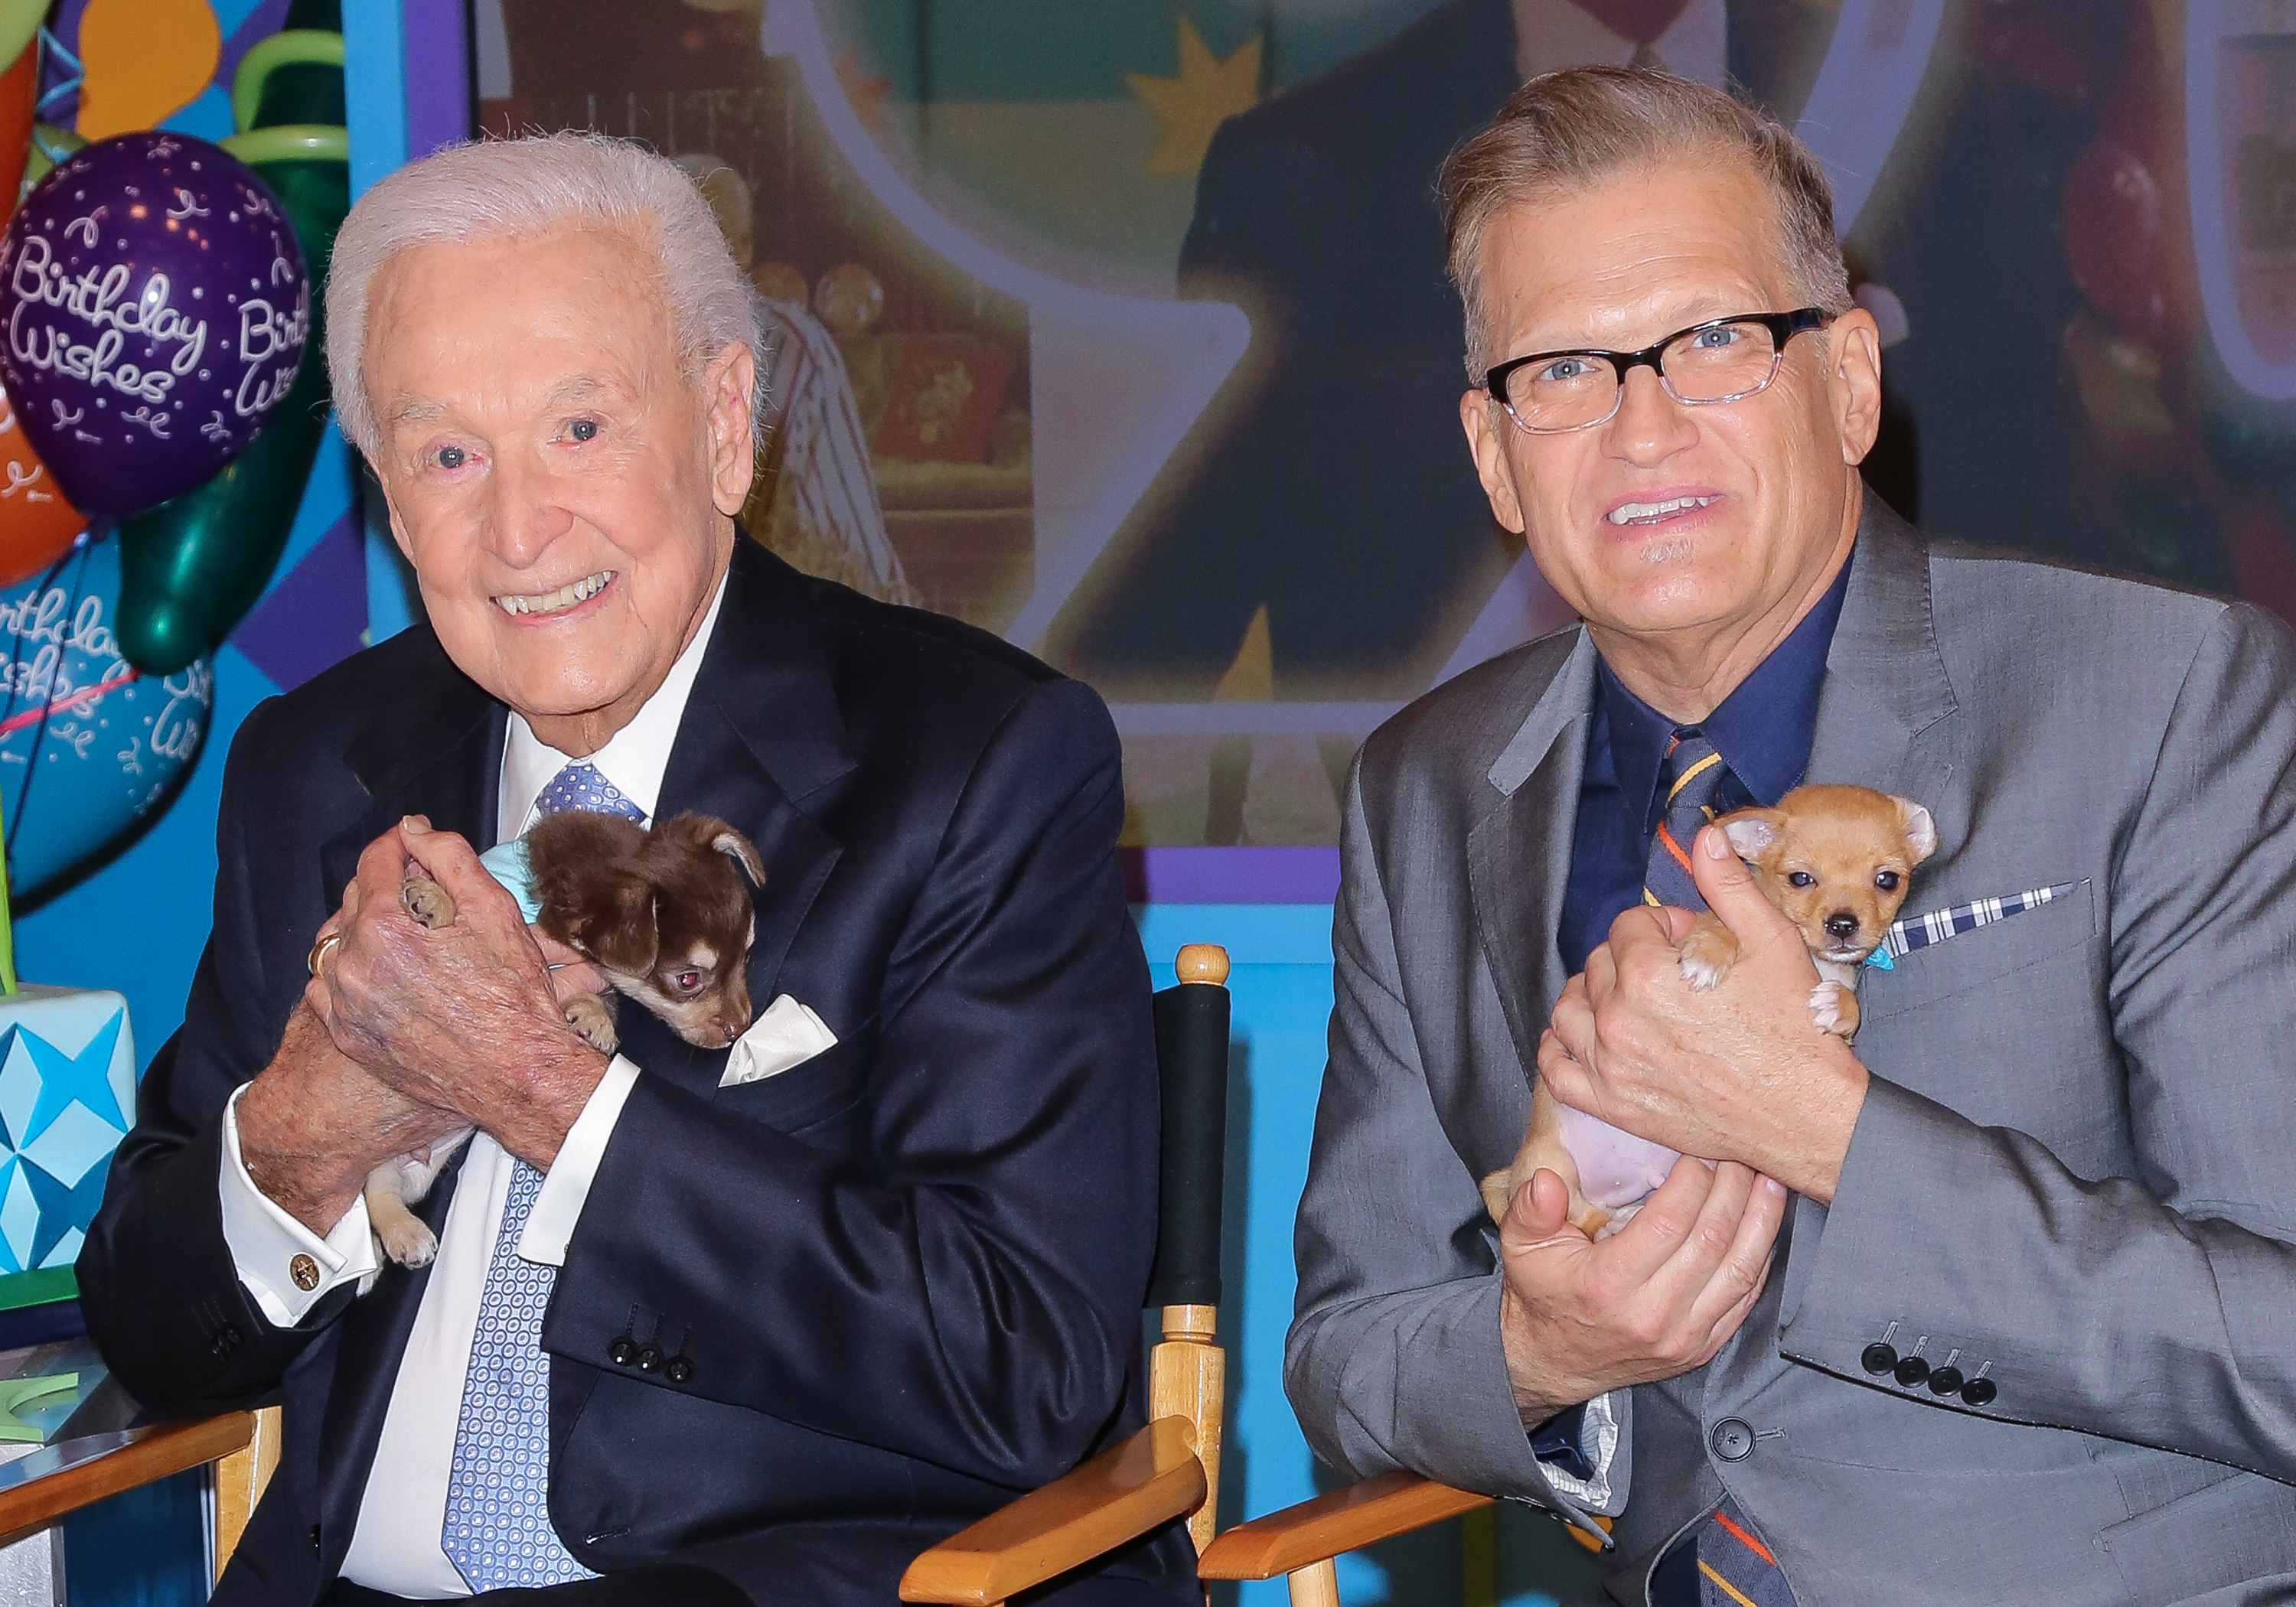 Bob Barker and Drew Carey on the set of "The Price Is Right" to celebrate Barker's 90th birthday at CBS Television City on November 5, 2013, in Los Angeles, California | Source: Getty Images